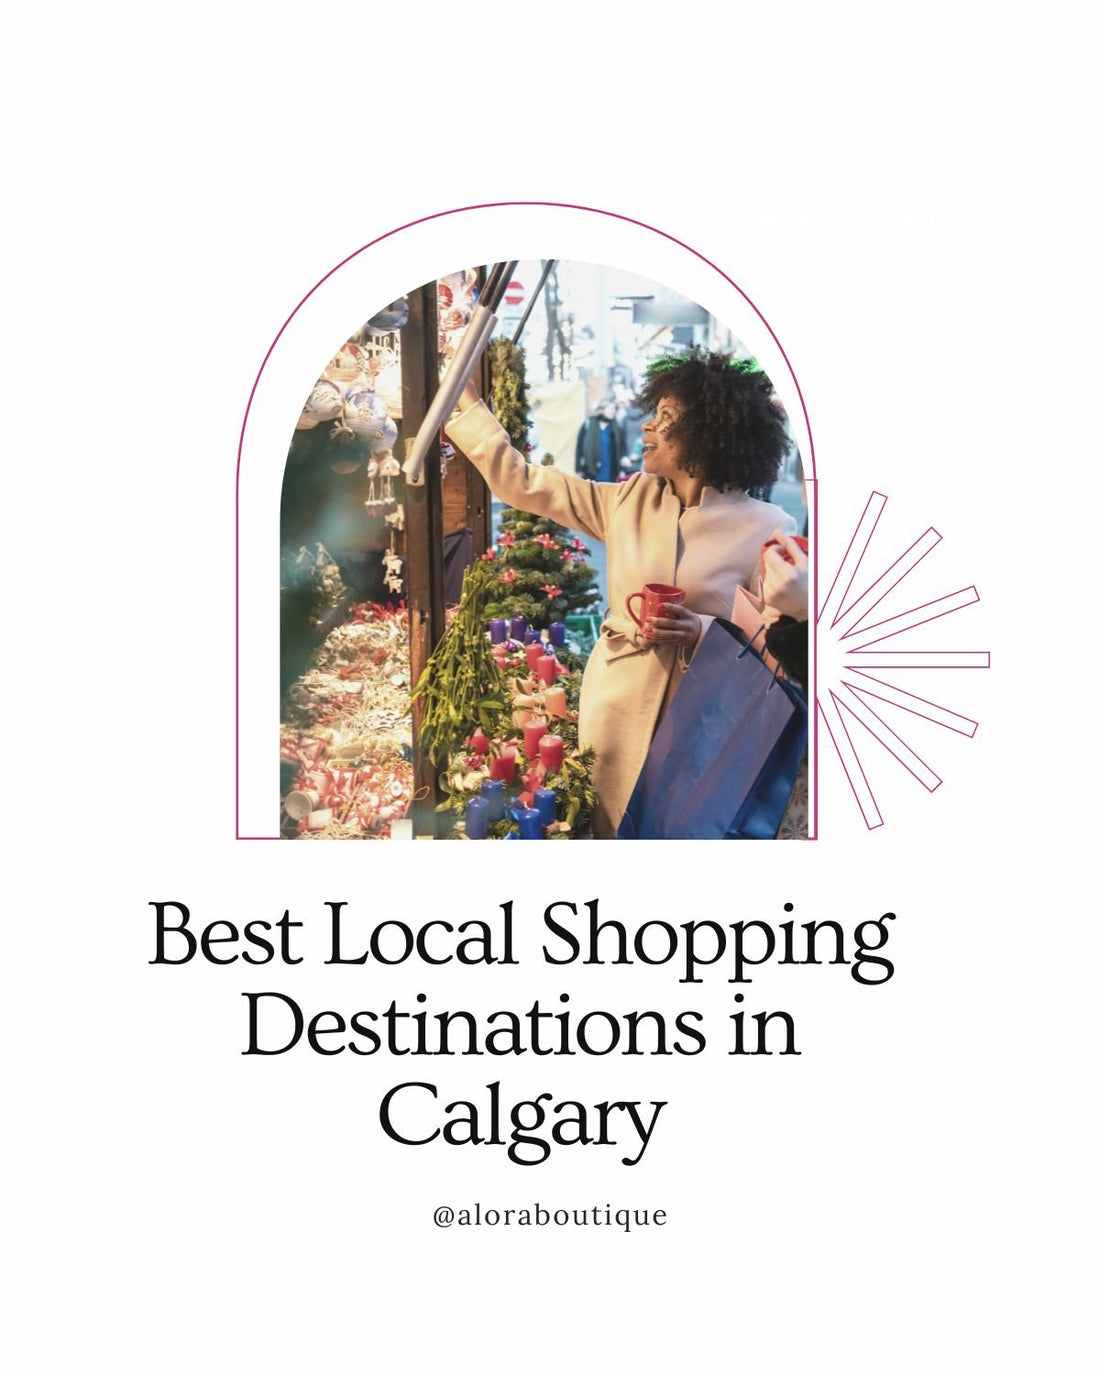 Discover the Best Local Shopping Destinations for Holiday Gifts in Calgary - Alora Boutique